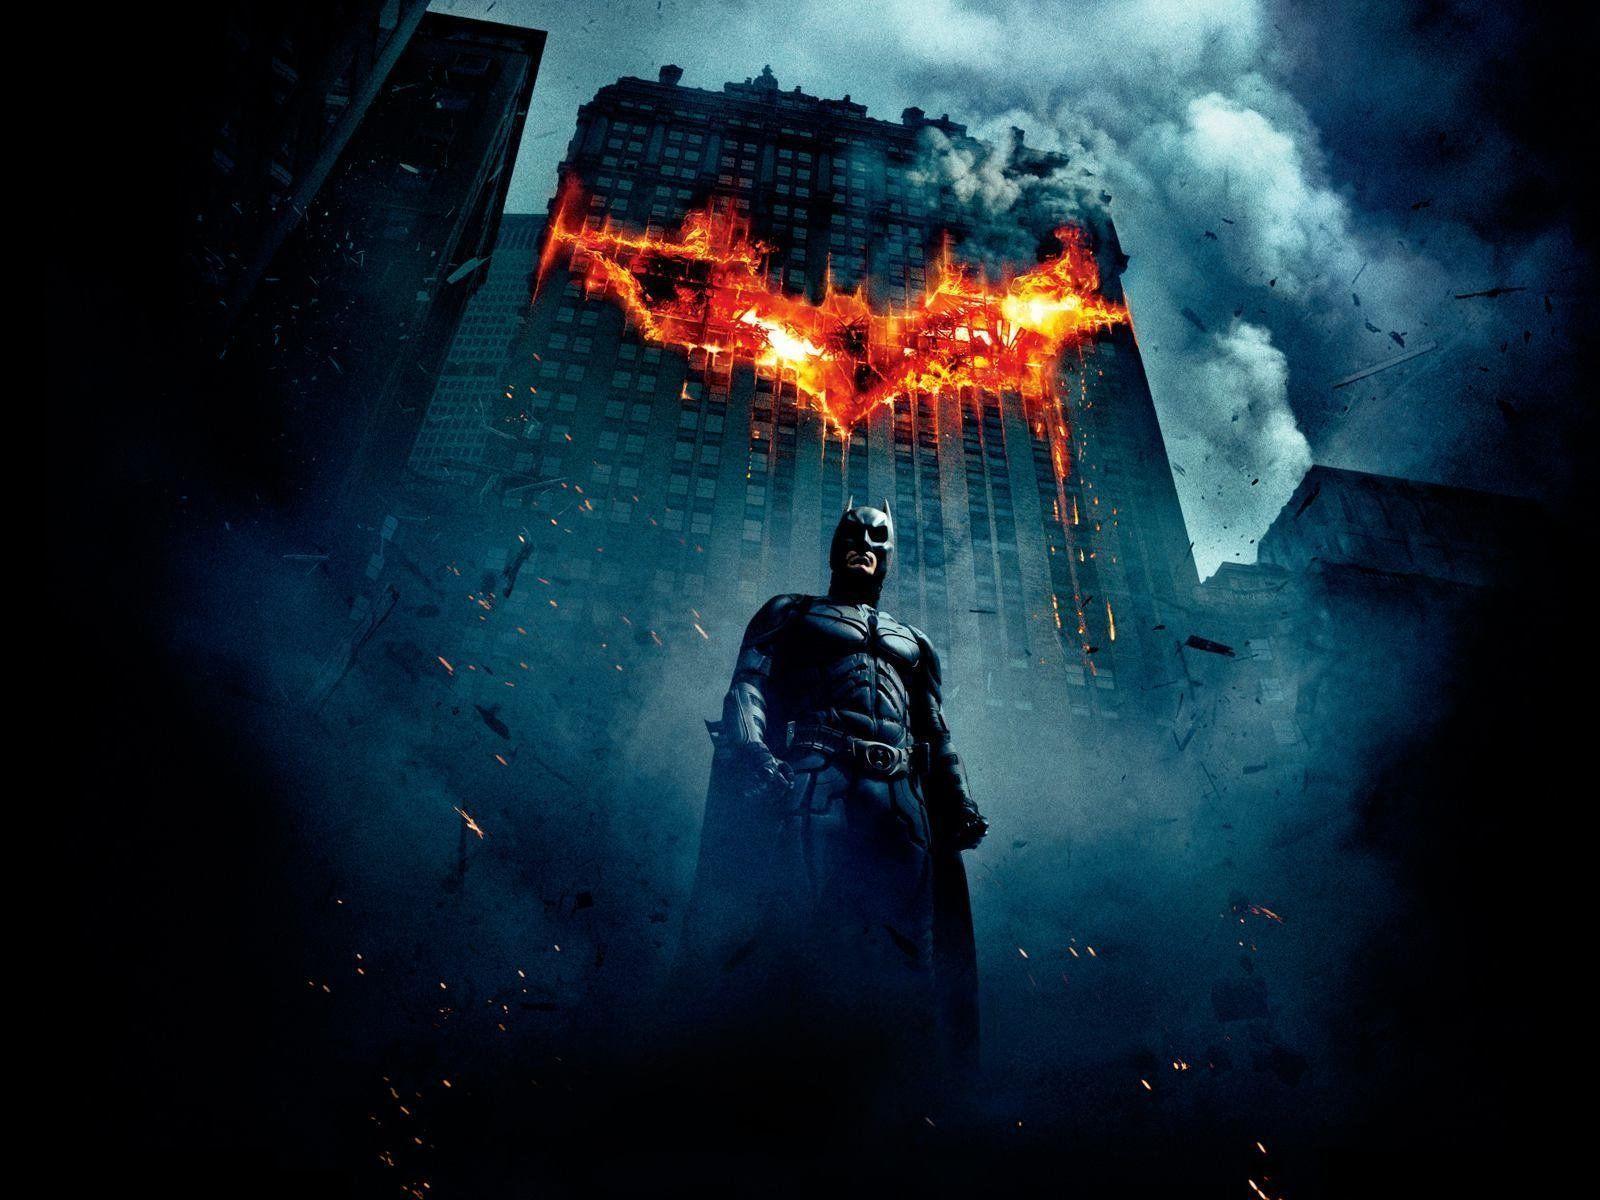 The Dark Knight HD Wallpaper and Background Image